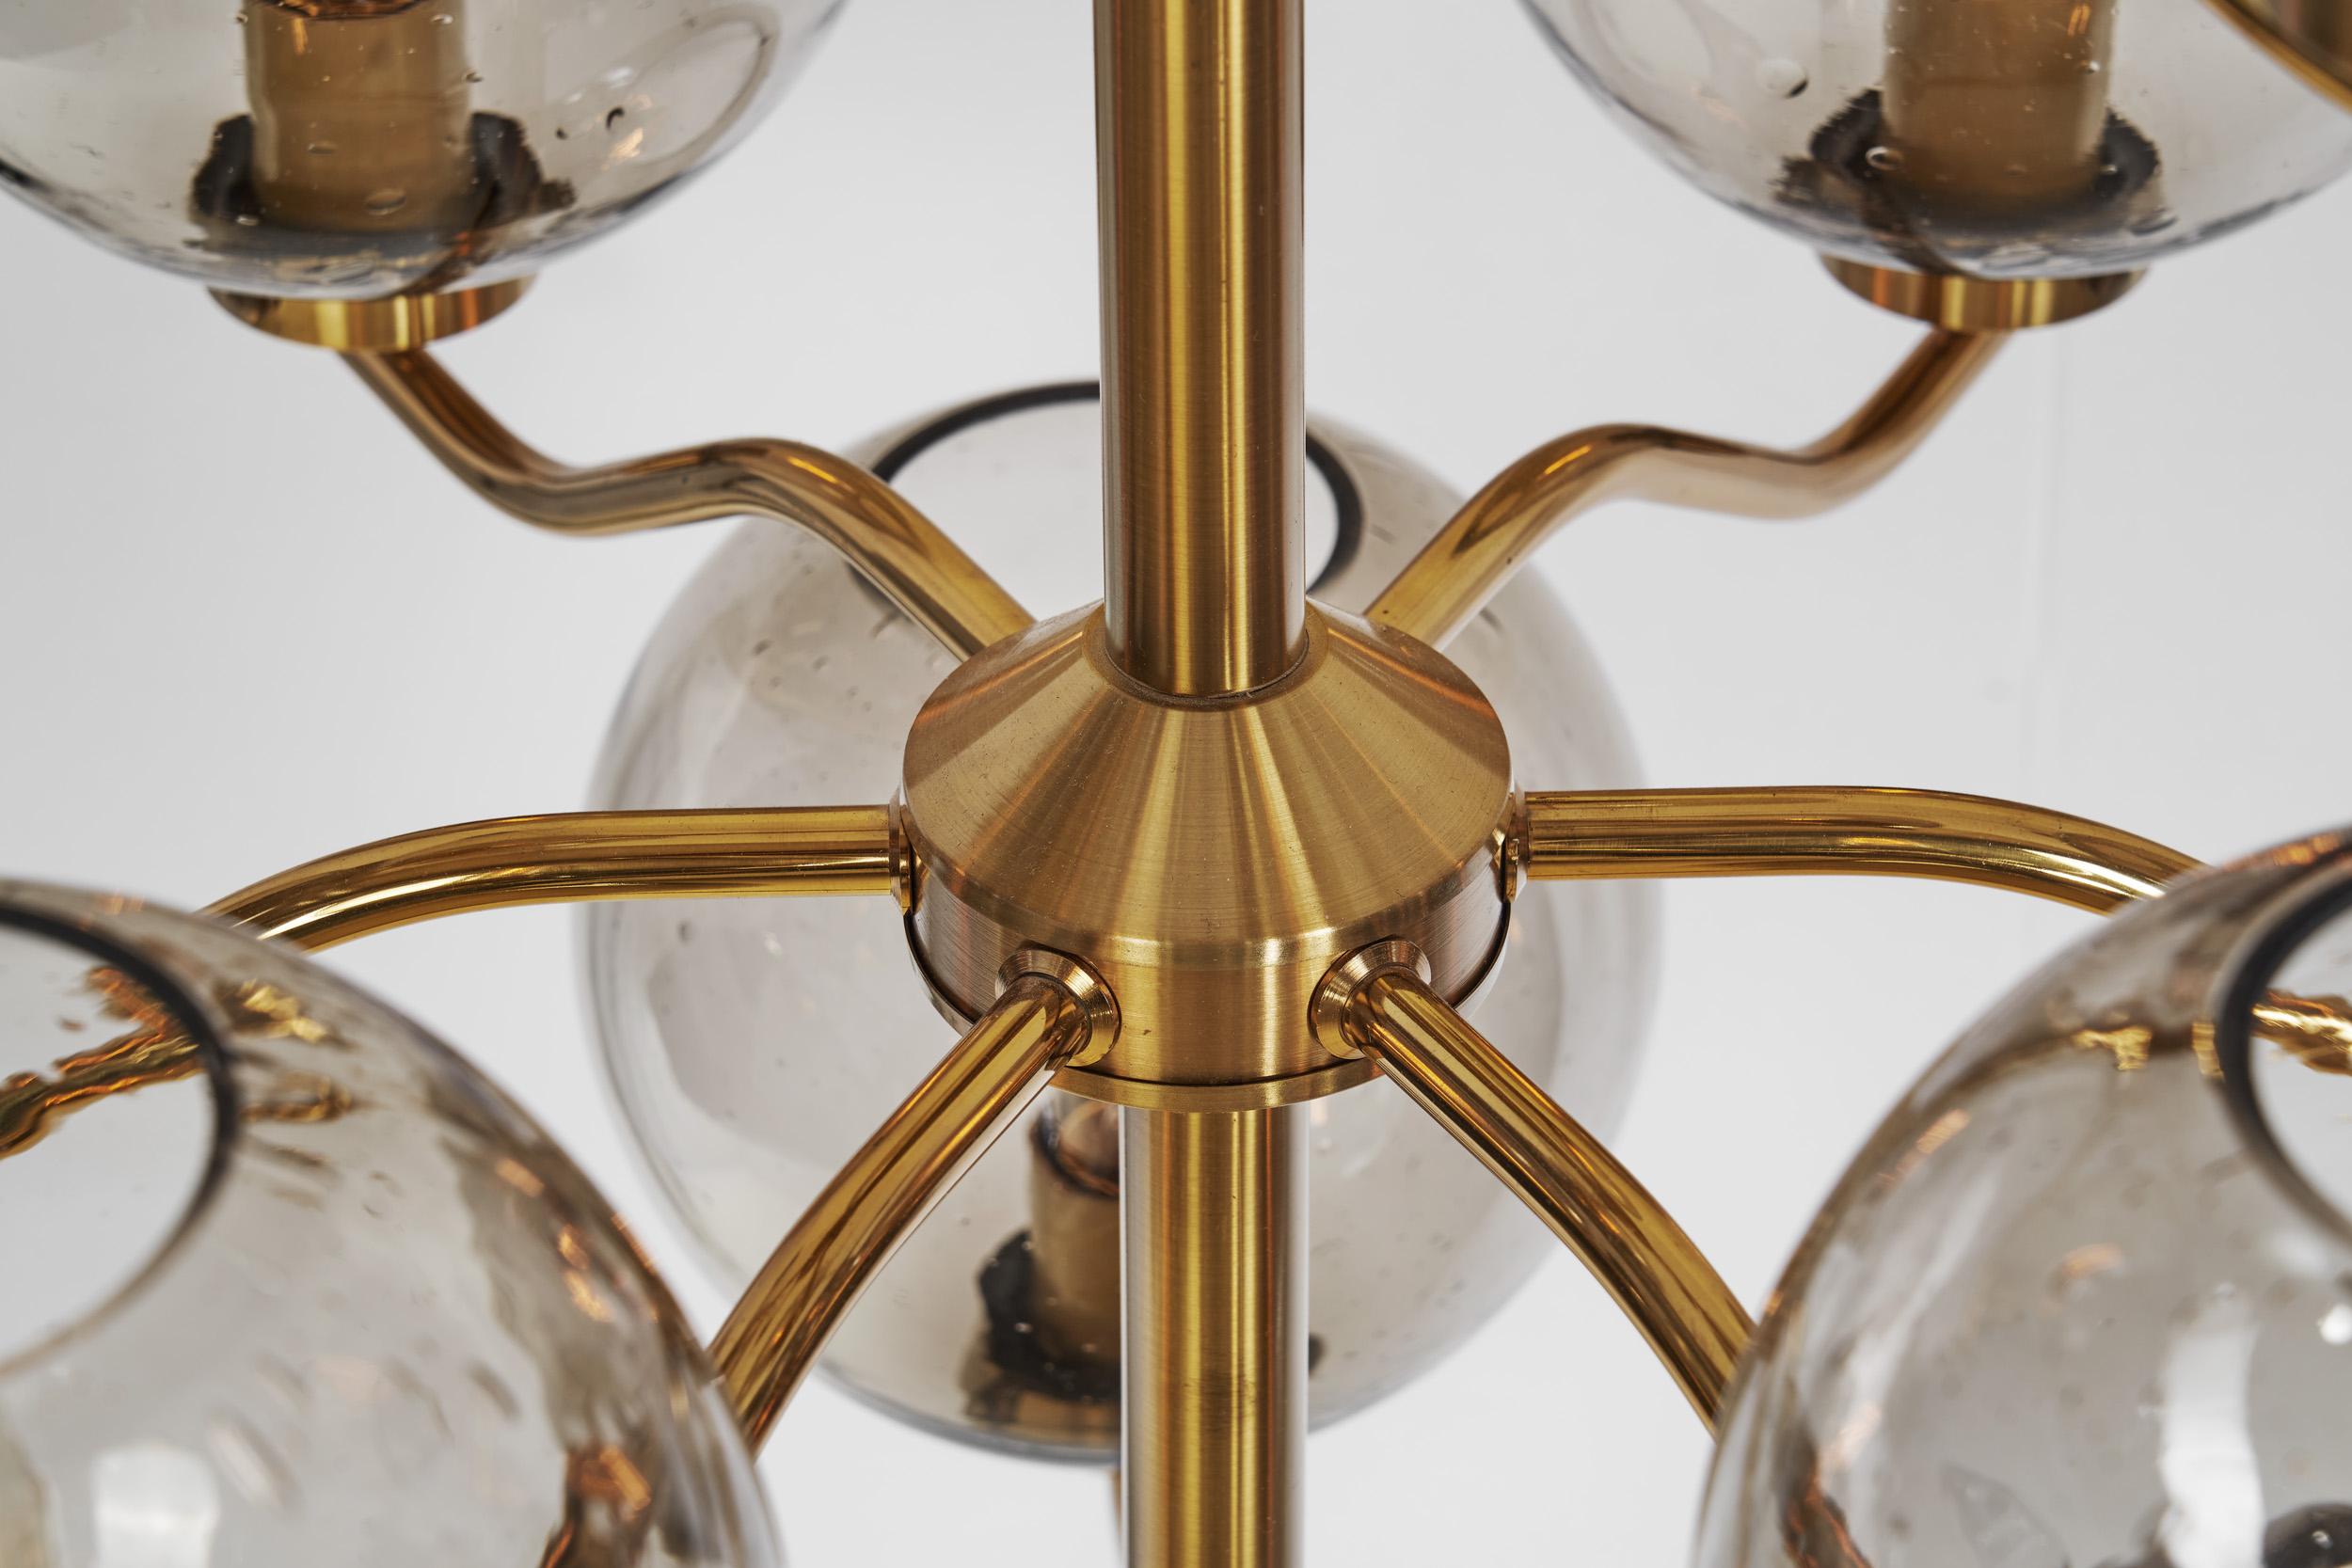 Holger Johansson Set of 4 Chandeliers with Glass Shades for Westal, Sweden 1970s For Sale 4